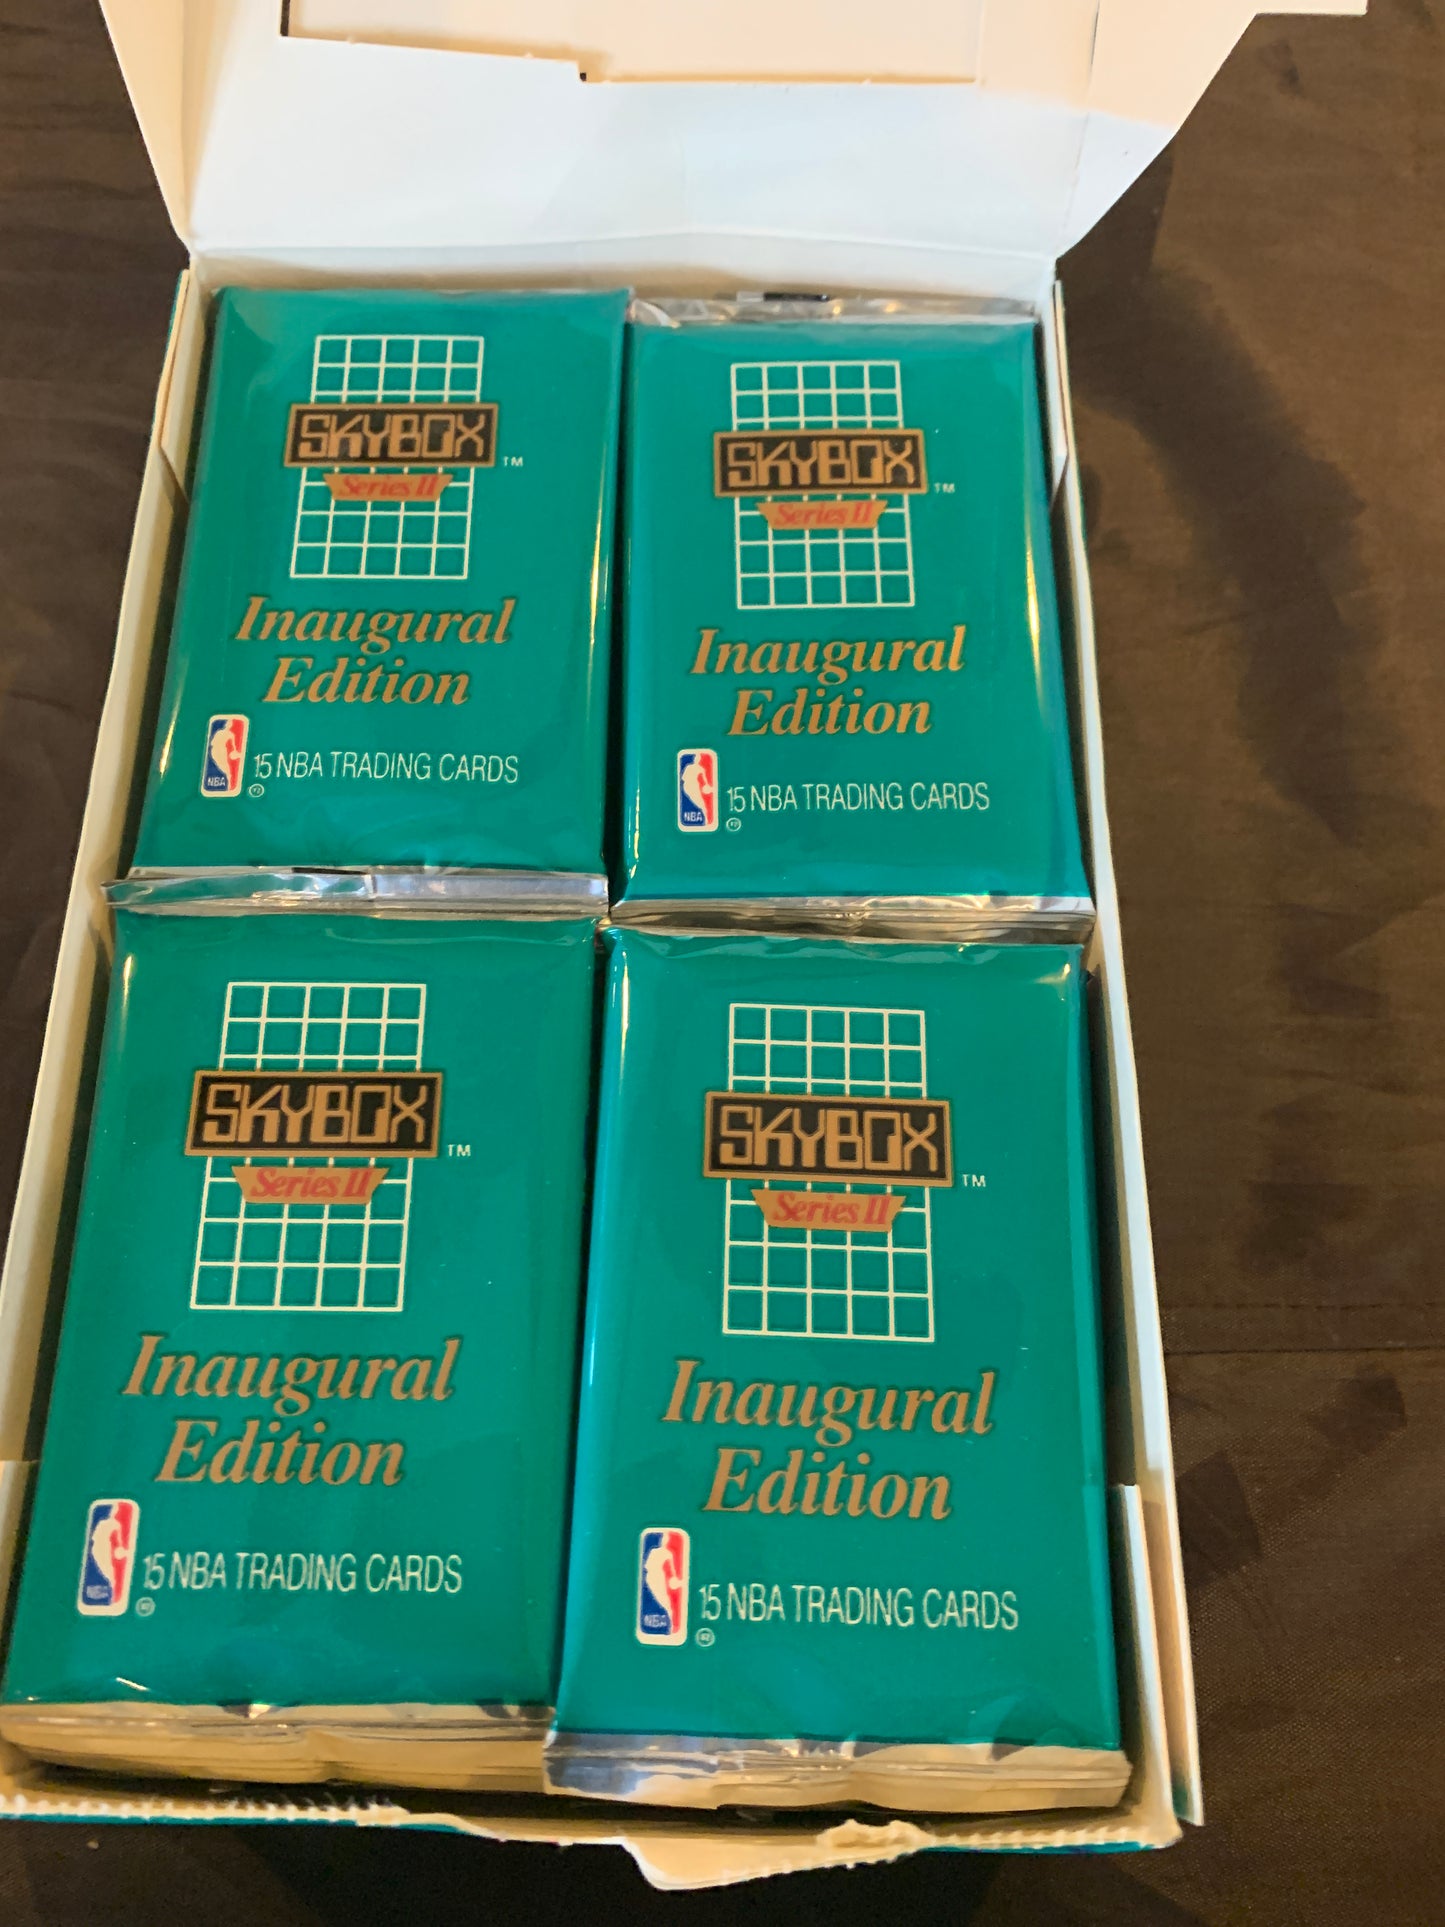 1990-91 Skybox Series 2 Basketball Cards, 1 Sealed PACK From Wax Box, 15 Cards